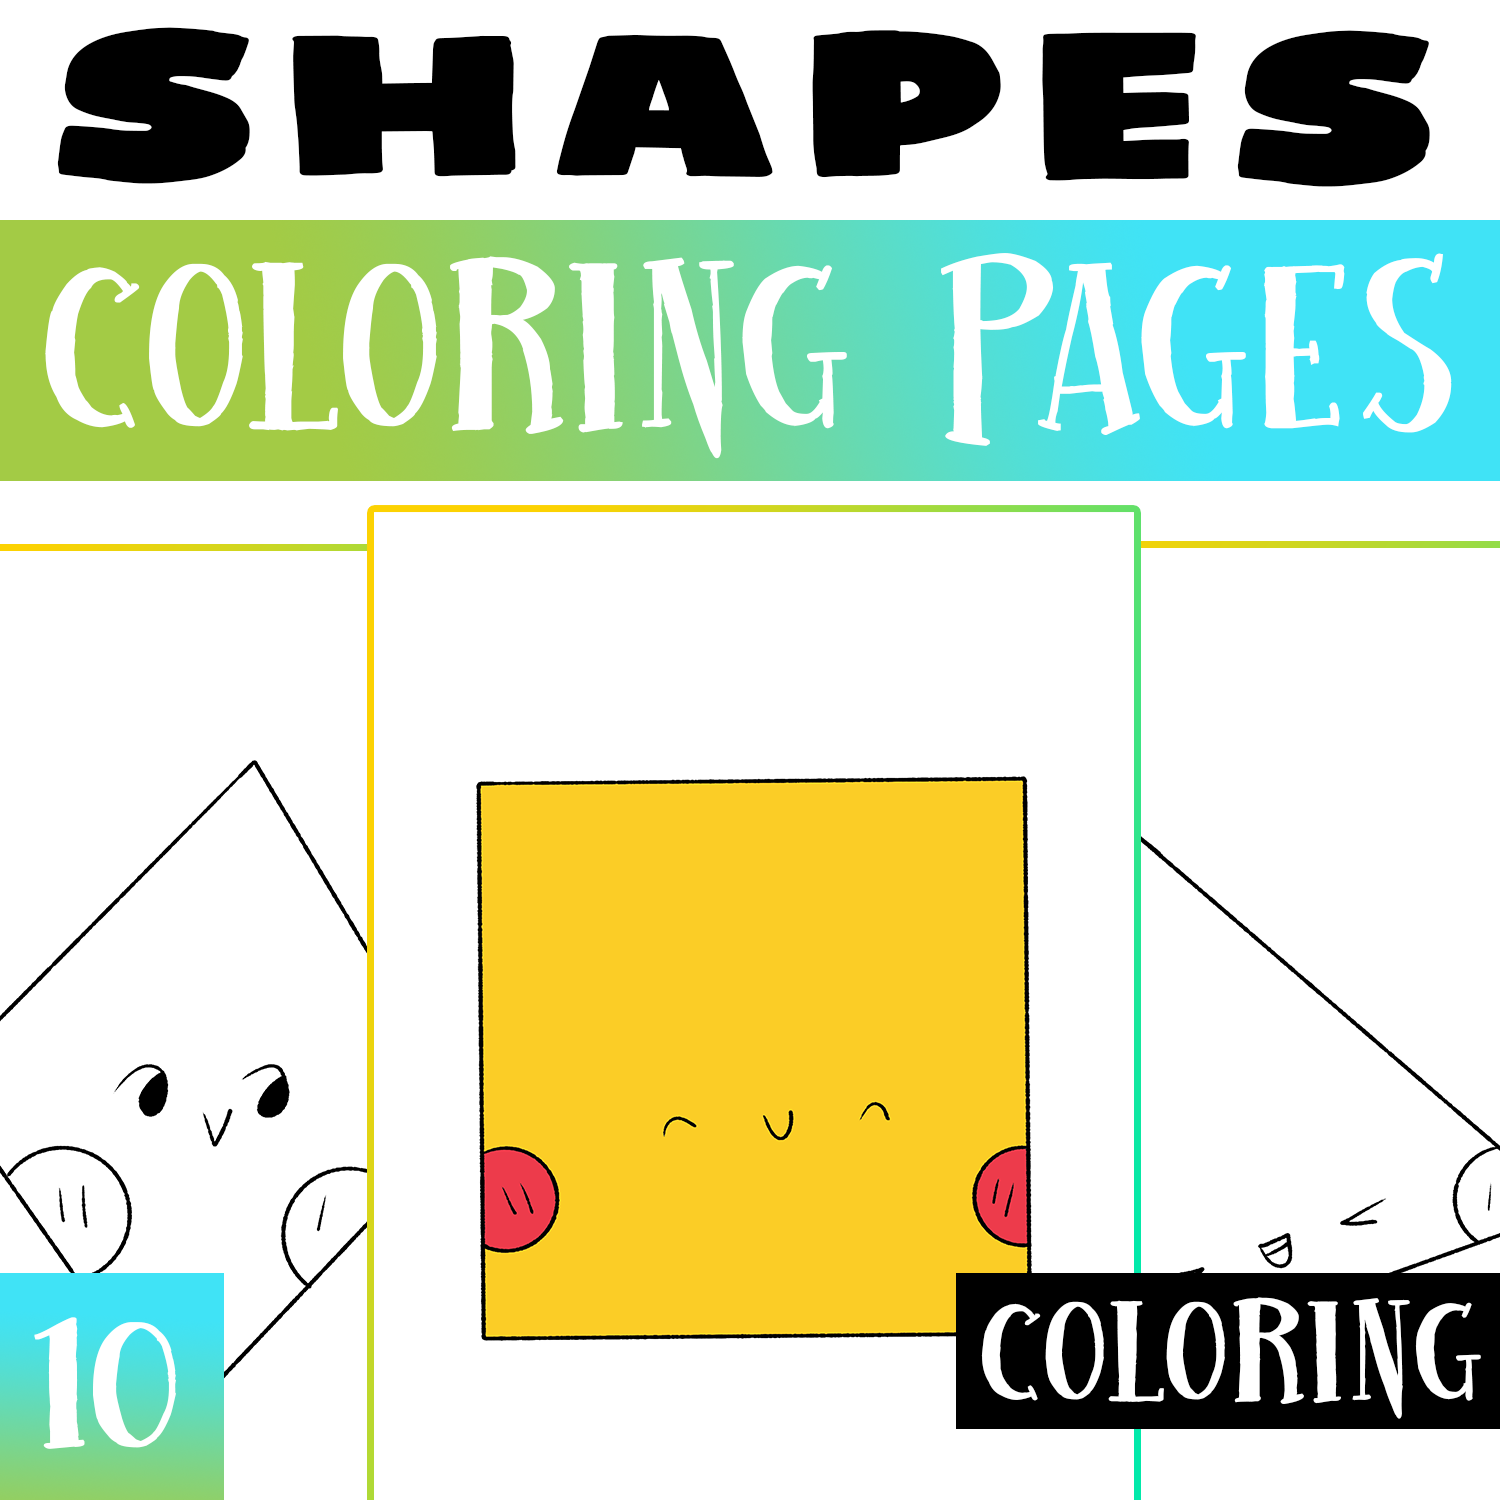 Shapes coloring pages worksheet activities shapes end of the year activity made by teachers